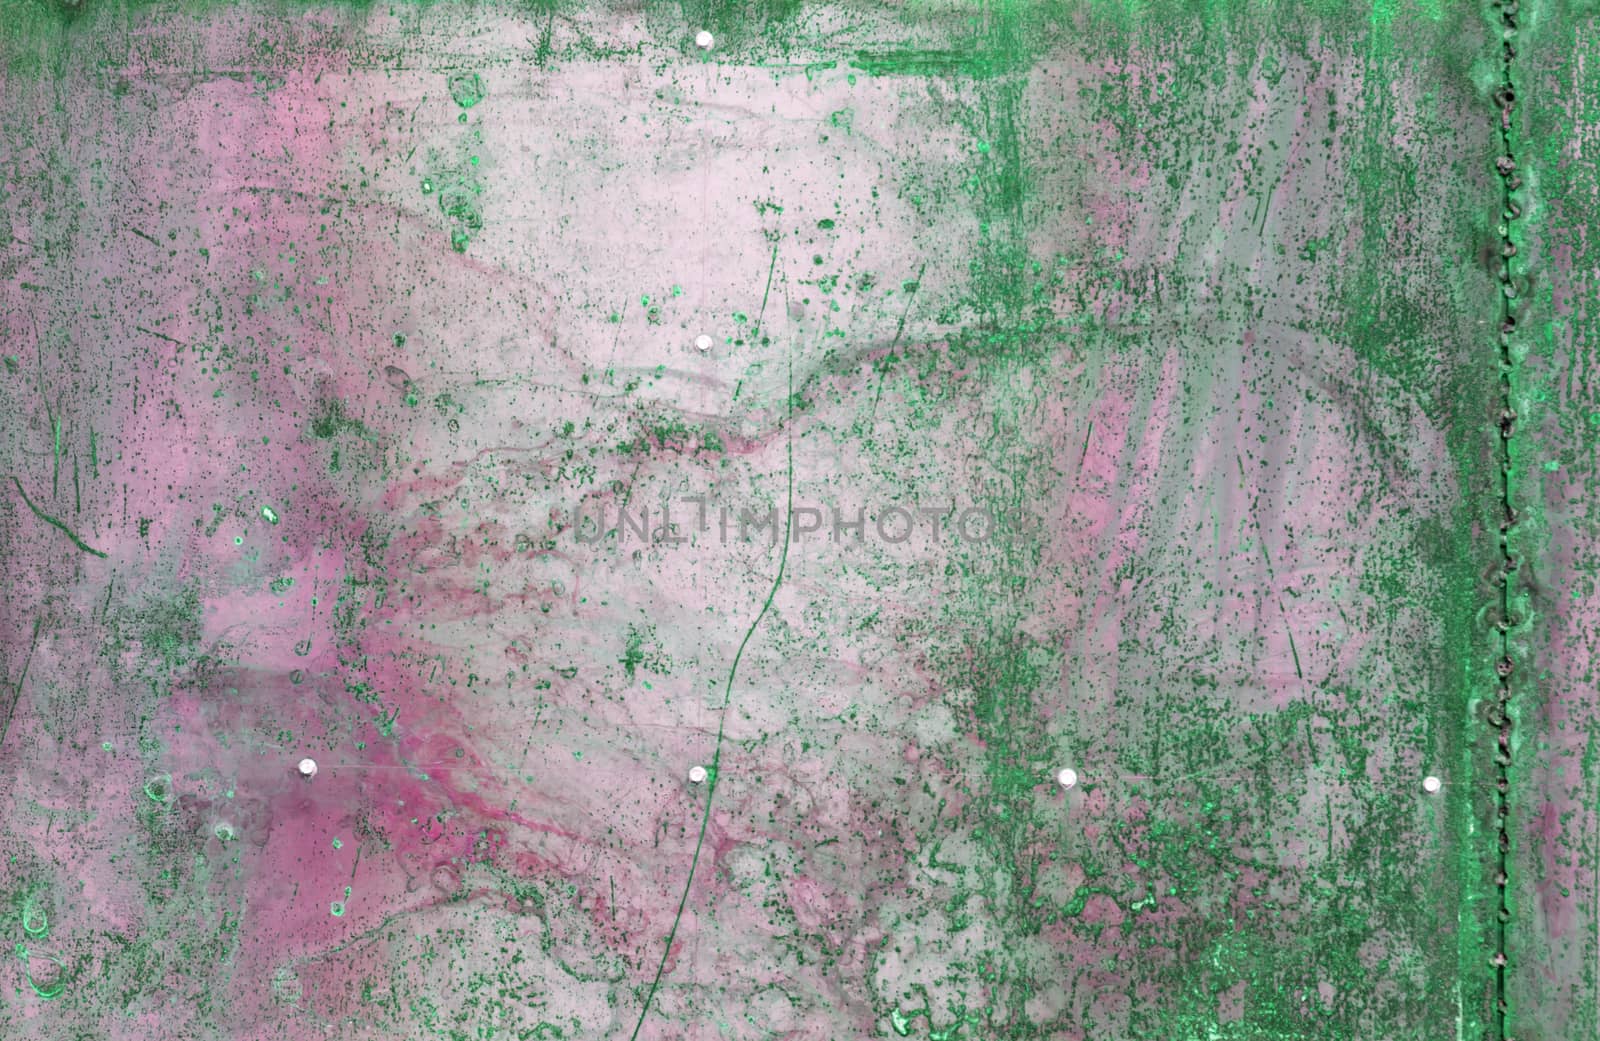 scratched and rusty green metal surface as background